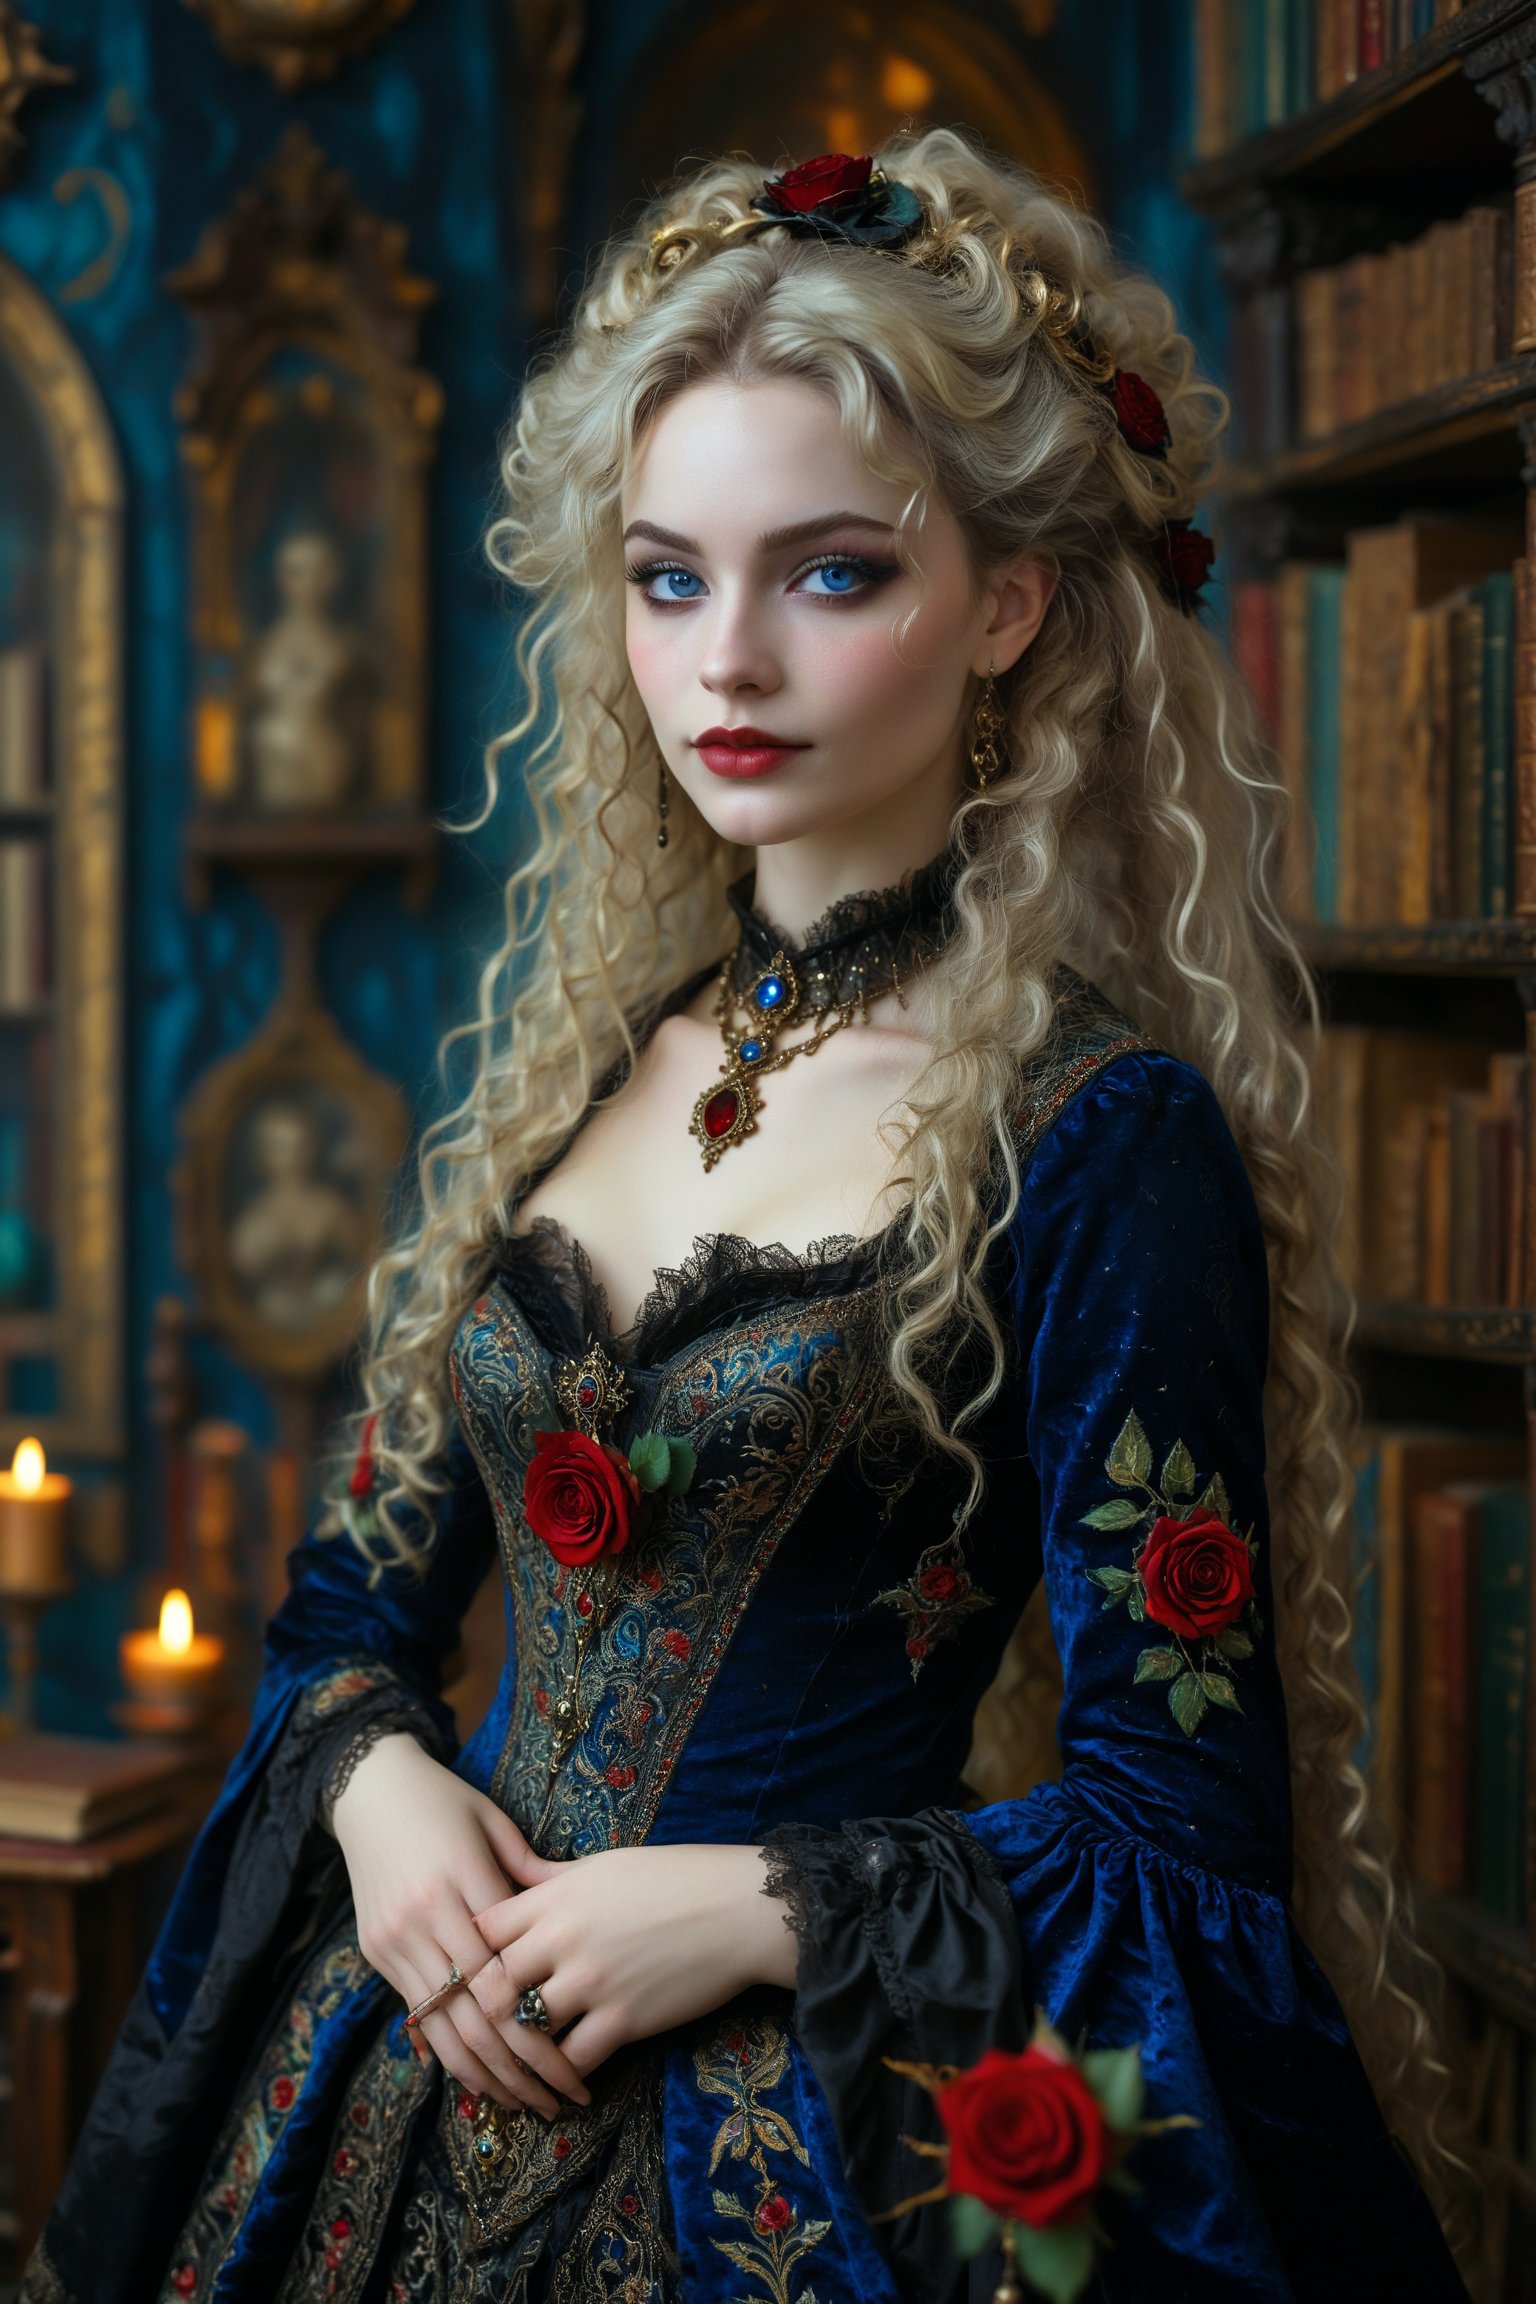 medium 1/3 shot of 1girl, a beautiful stunning captivating  rococo gothic witch. (((she has big very long curly blonde hair))). her clothes and adornments show that the has exquisite taste and she is very wealthy. decorative bejewelled gold ornaments and black and red roses in her hair. big round beautiful warm happy deep blue eyes. dark gothic make-up. smooth perfect skin, beautiful full lips. she has a warm, welcoming smile. she is resplendent in a beautiful elaborate velvet gothic witch dress adorned with intricate embroidery, brocade in rich colors and luxurious fabrics. she has her hands down at her sides. the detailed background includes her luxurious rococo study library with shelves full of ancient leather books, colorful crystal bottles, candles, magical items. she is a benevolent and loving witch.,real_booster